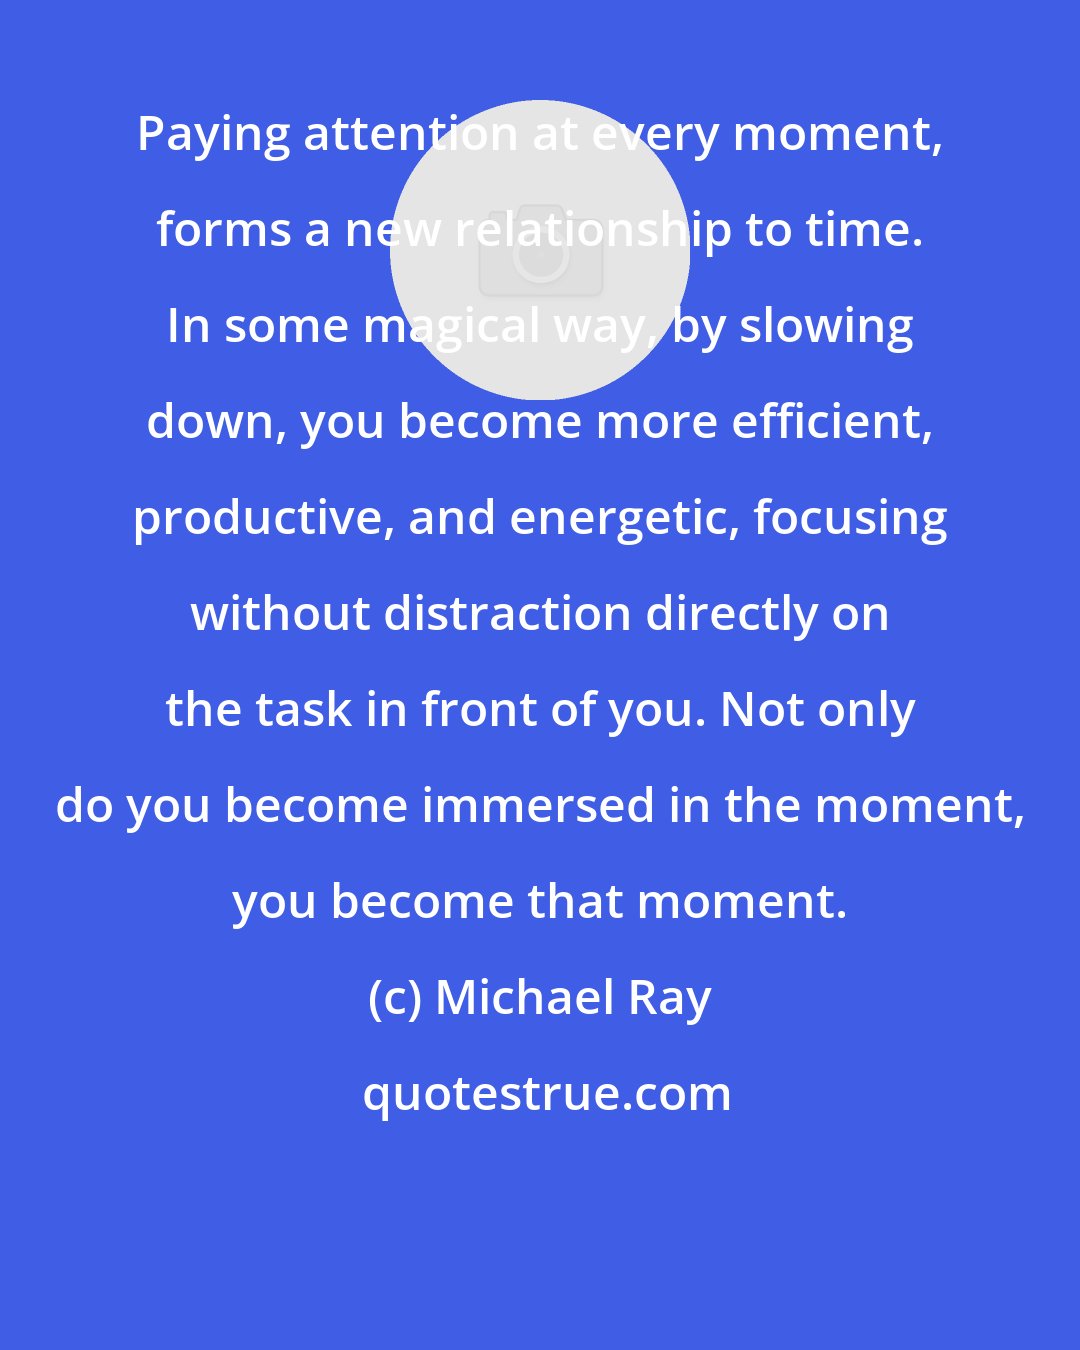 Michael Ray: Paying attention at every moment, forms a new relationship to time. In some magical way, by slowing down, you become more efficient, productive, and energetic, focusing without distraction directly on the task in front of you. Not only do you become immersed in the moment, you become that moment.